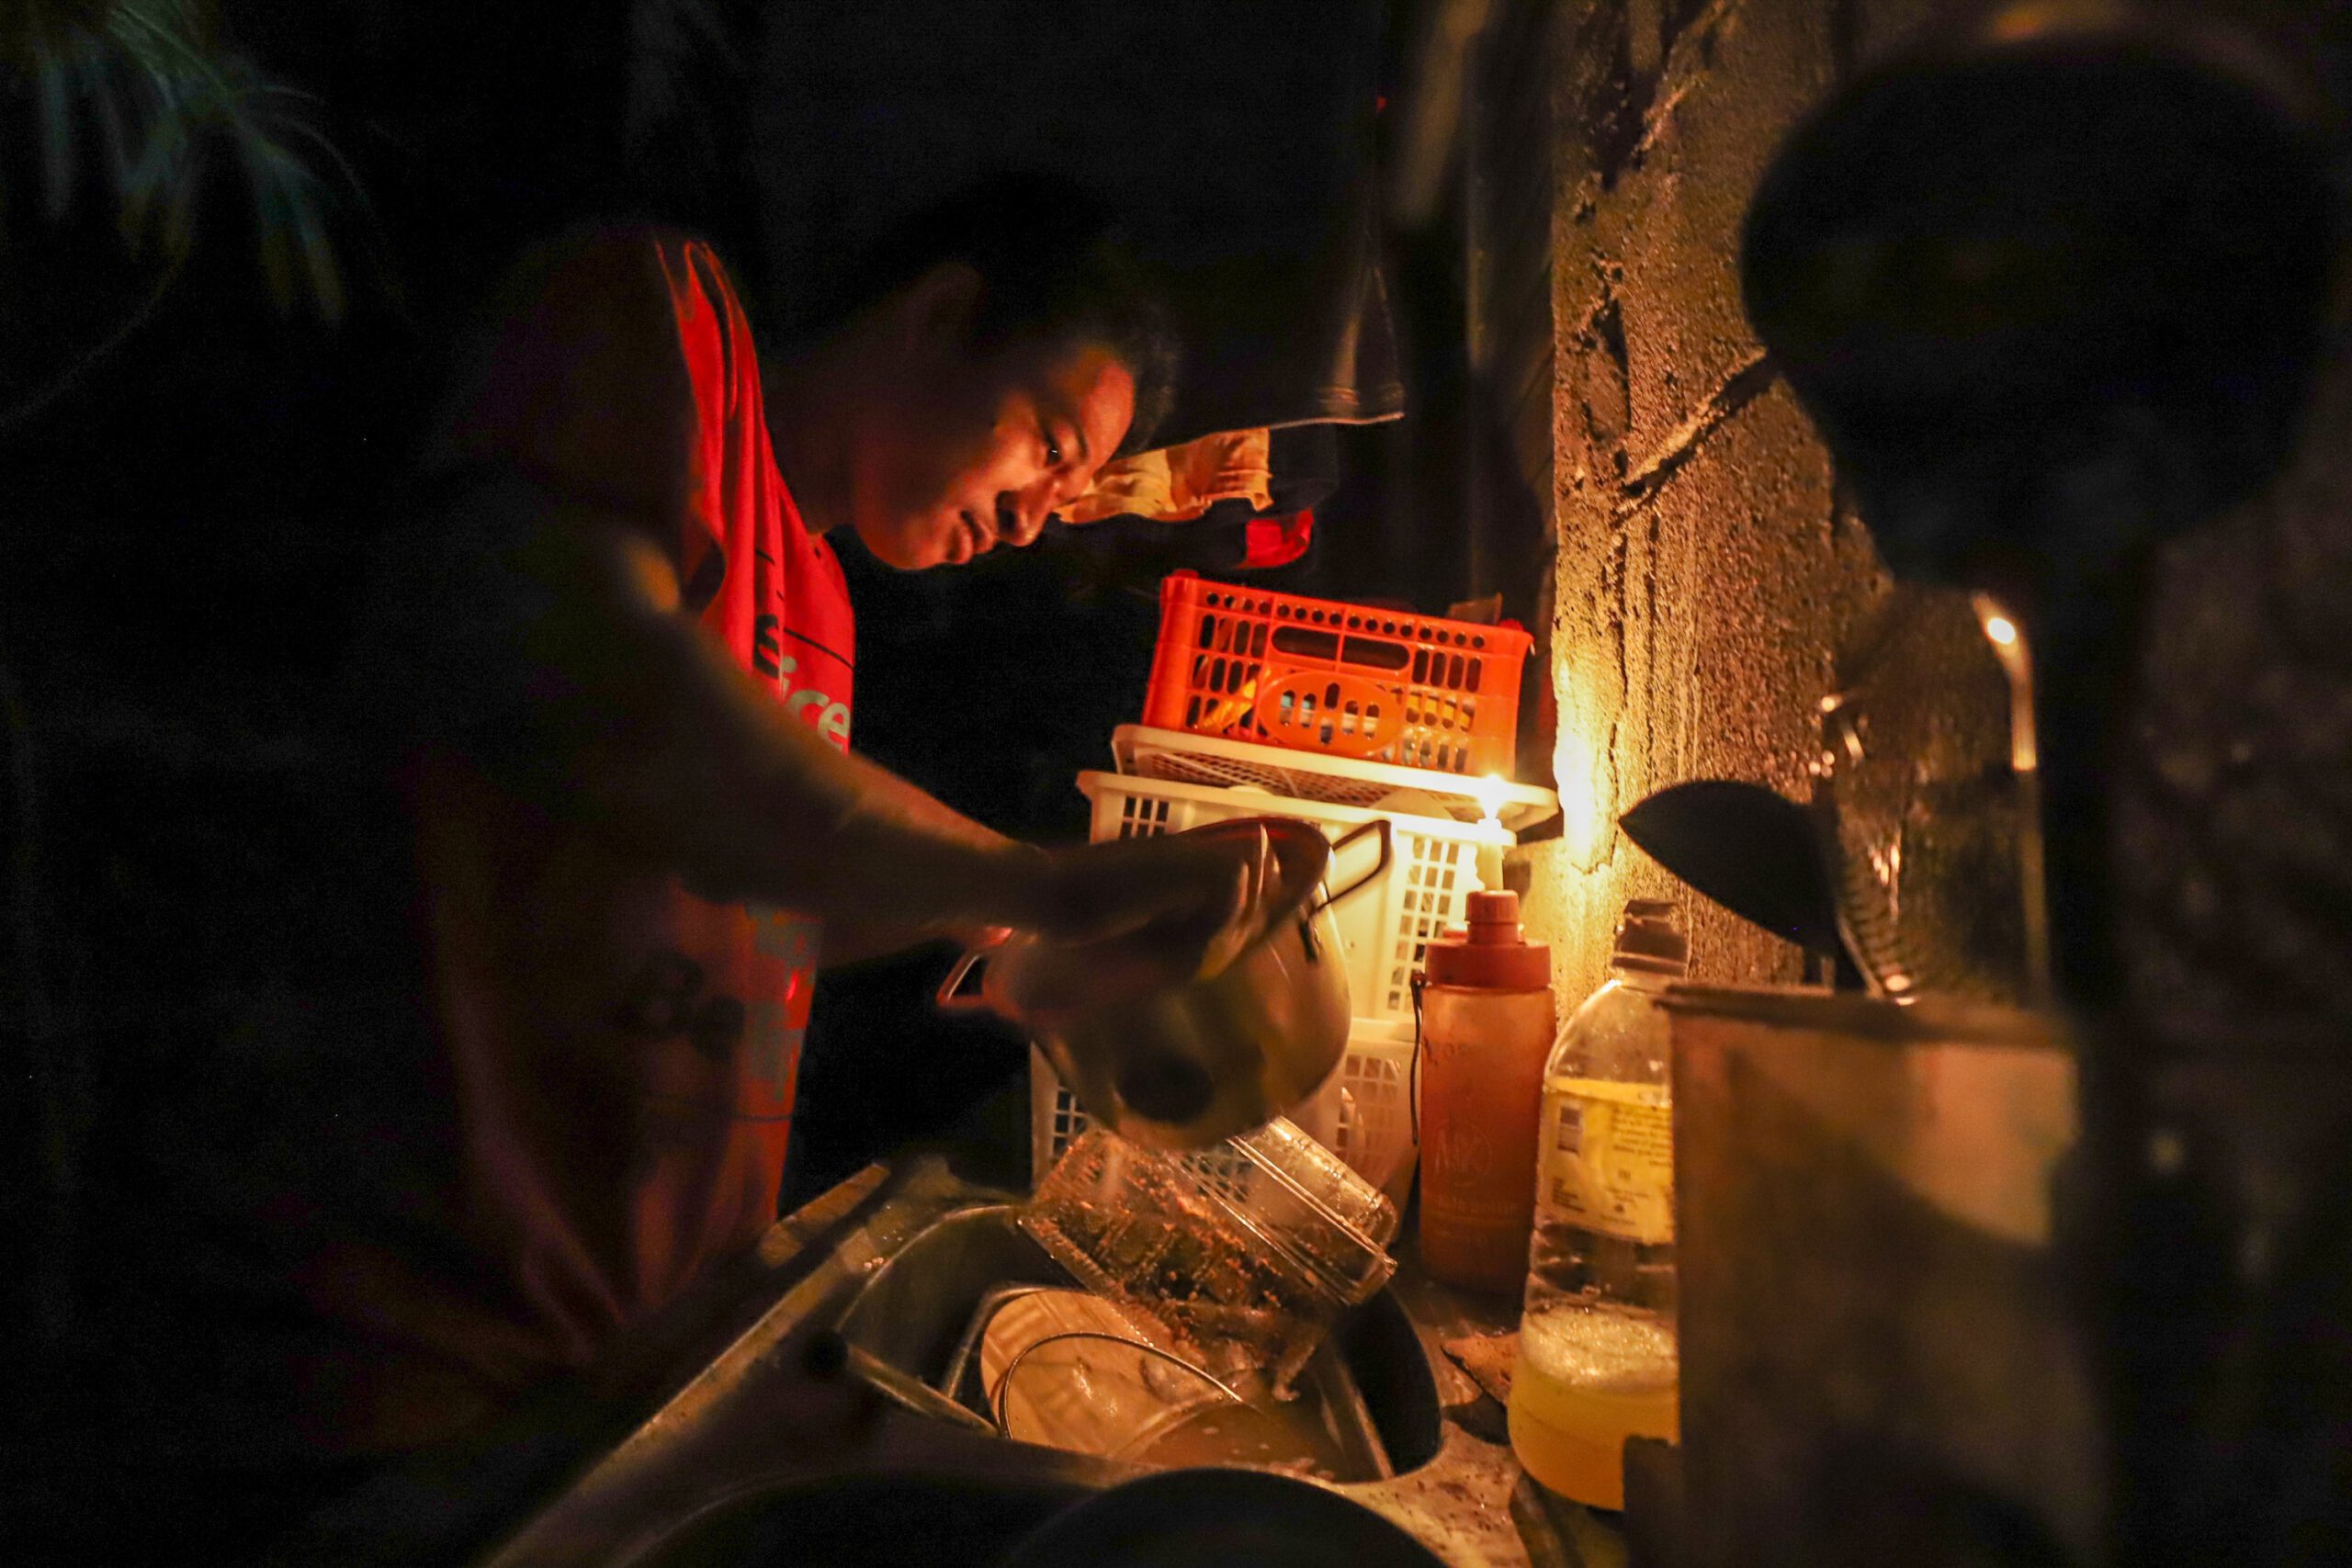 LGUs, businesses call for probe into Western Visayas blackout